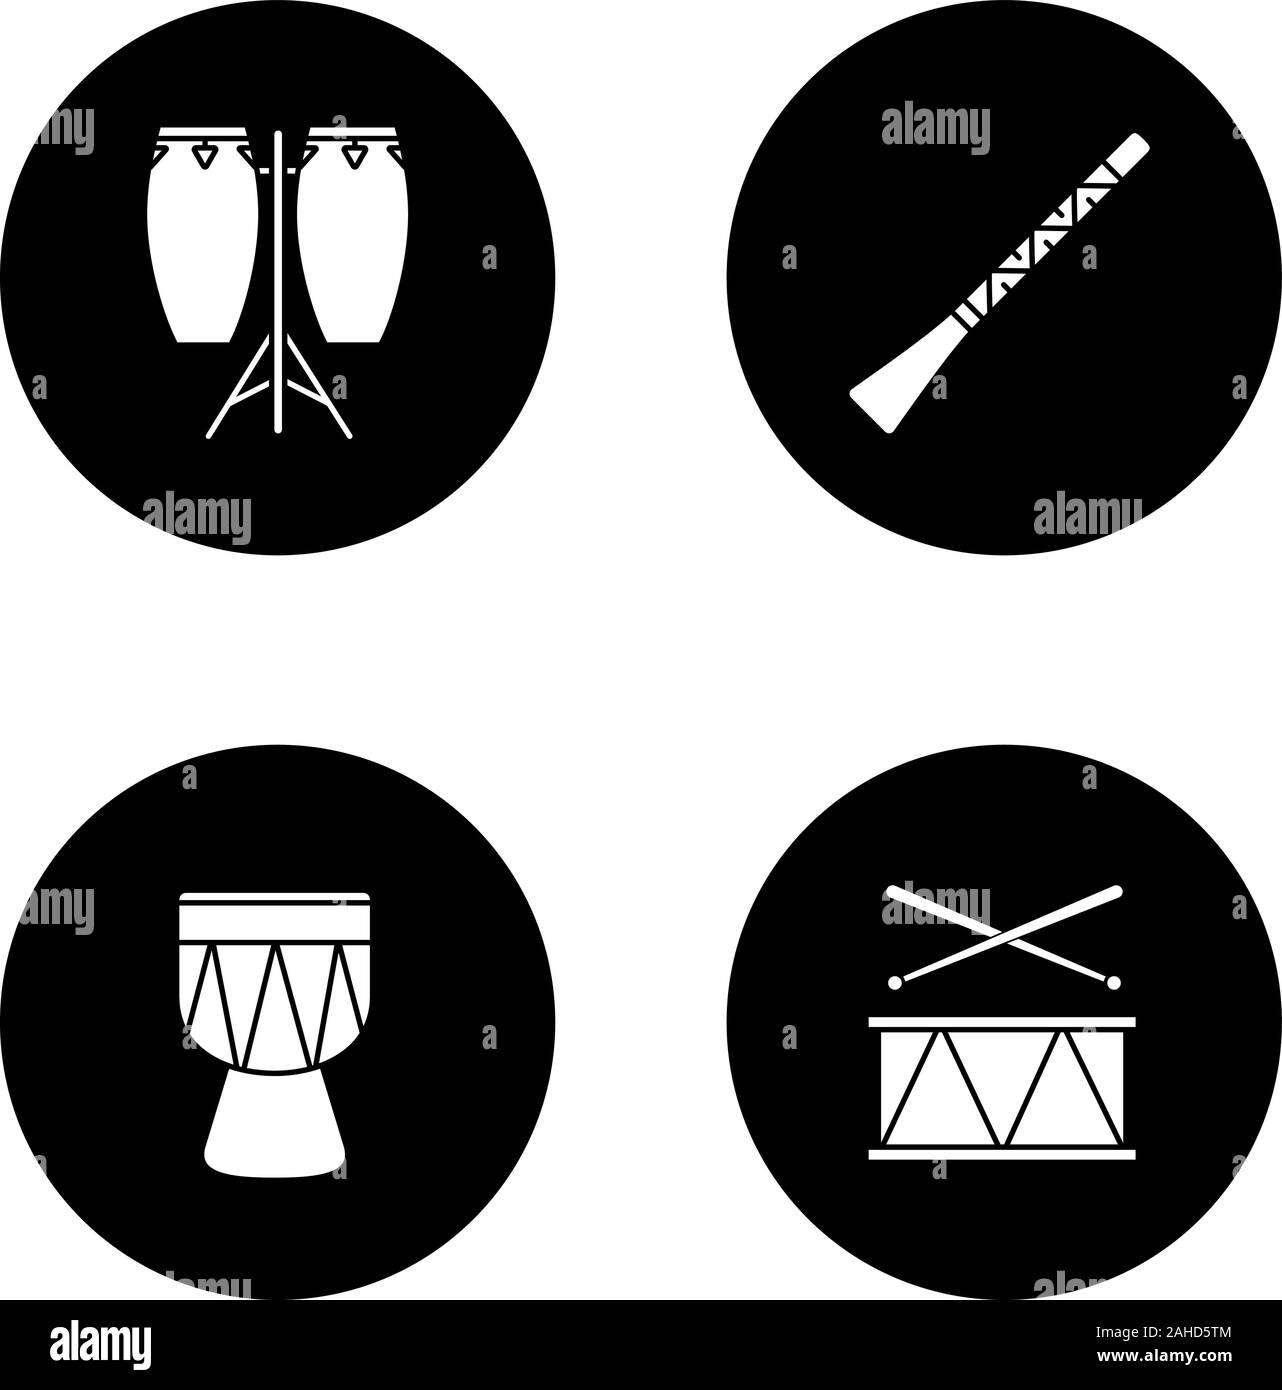 Musical instruments glyph icons set. Conga, didgeridoo, kendang, drum. Vector white silhouettes illustrations in black circles Stock Vector